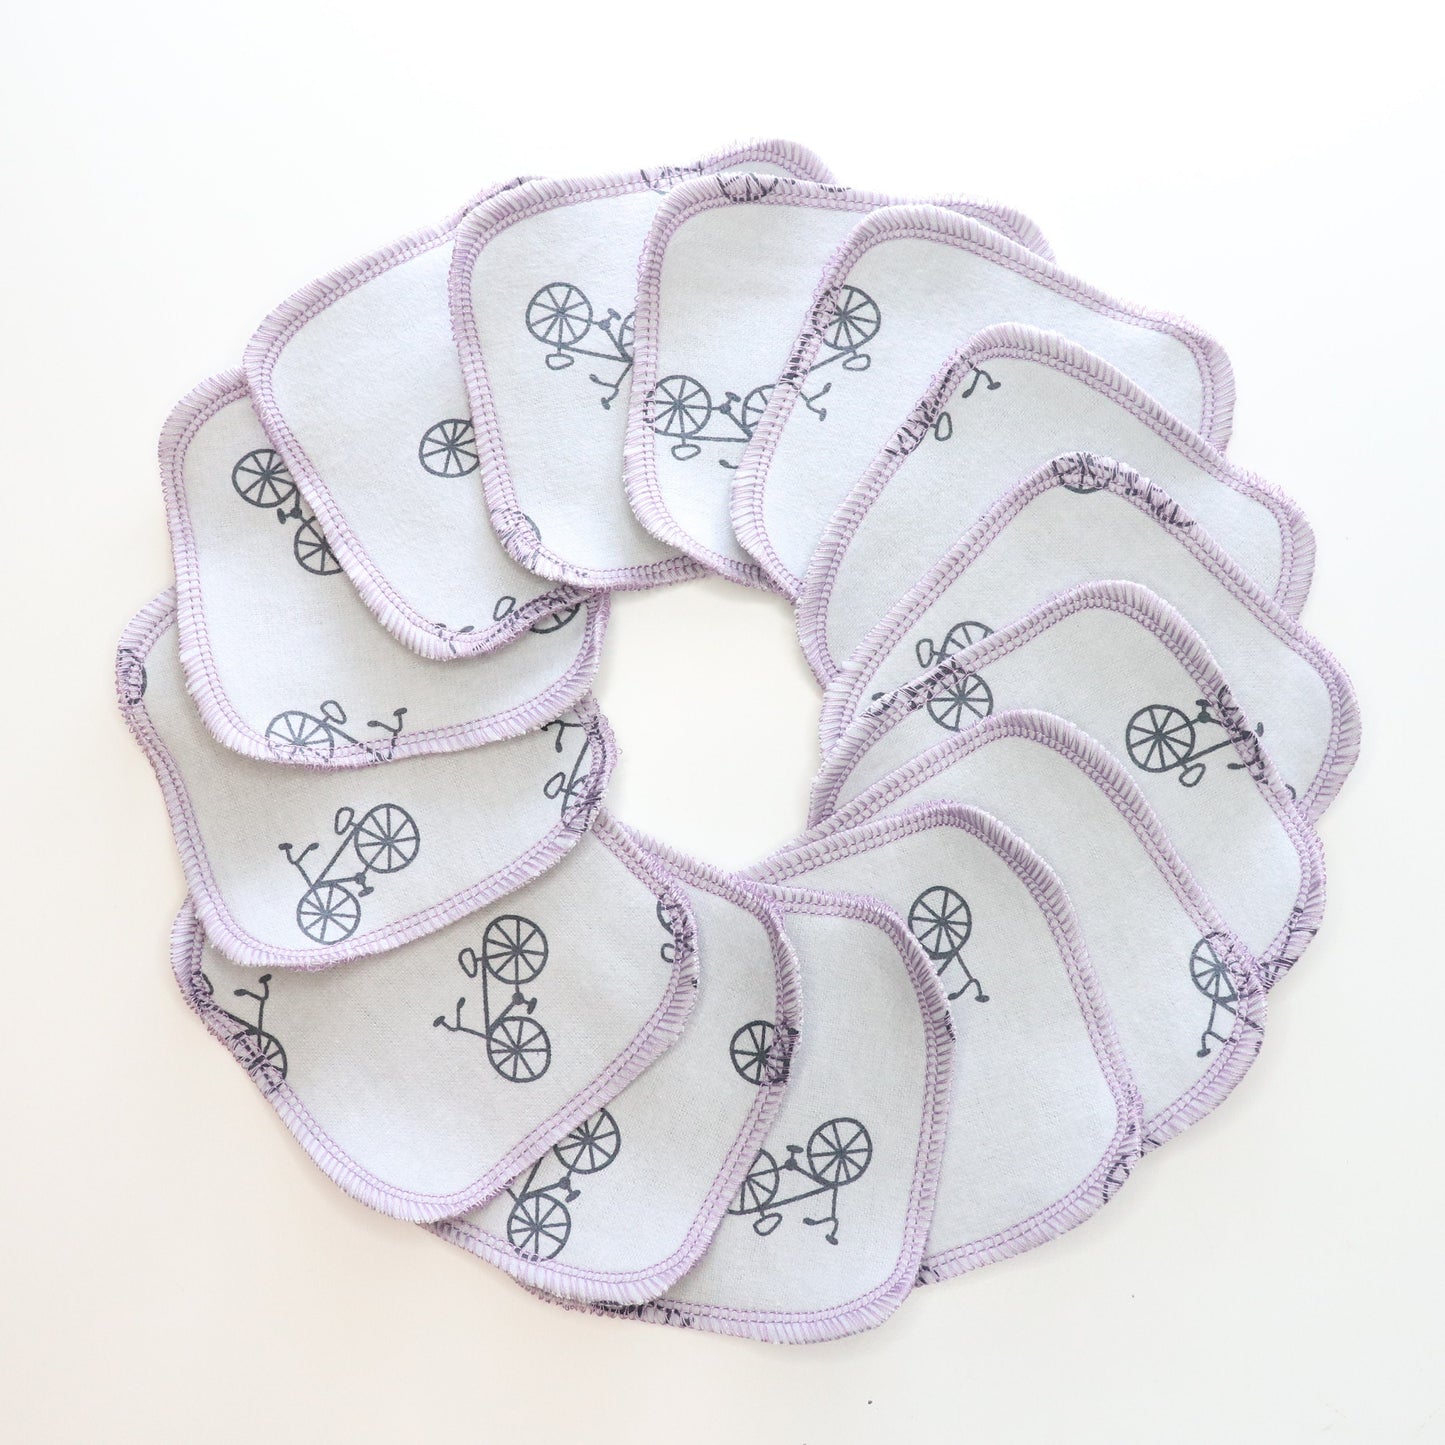 Reusable cotton rounds arranged in a circle. This print is a light grey with scattered black bicycles. Stitched together with light purple thread in a rounded square shape.